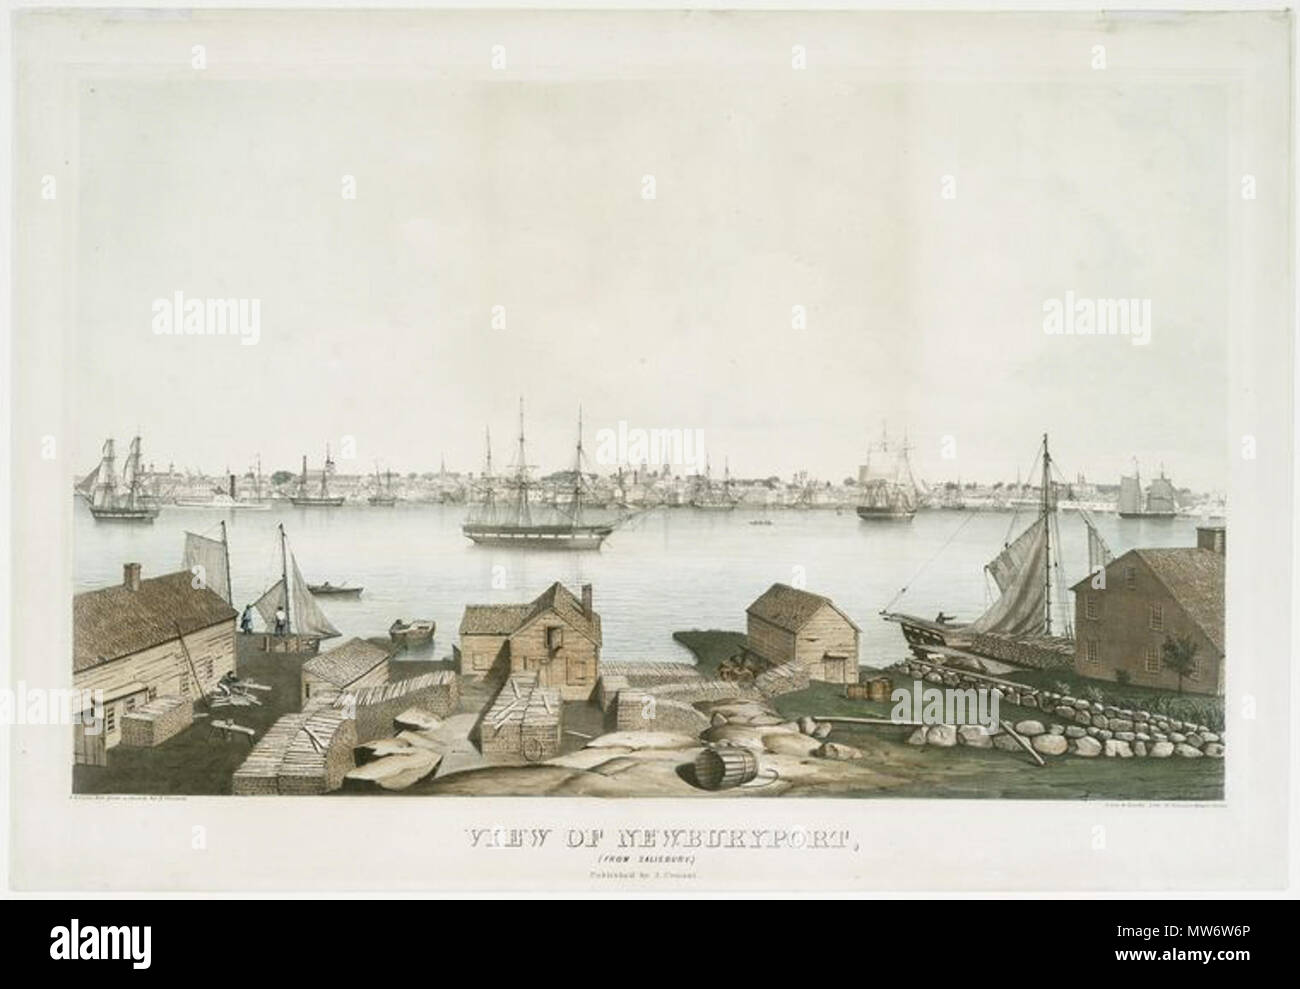 . Image Title: View of Newburyport, (from Salisbury.) Creator(s): Lane, Fitz Hugh, 1804-1865 -- Artist Conant, Alban Jasper, 1821-1915 -- Artist Additional Name(s): Conant, Alban Jasper, 1821-1915 -- Publisher Lane and Scott's Lithography -- Printer Of plates Published Date: [1846] Depicted Date: [1846] Medium: Lithographs -- Hand-colored Specific Material Type: Prints Item Physical Description: 1 print : tinted lithograph with hand coloring ; 40.6 x 64.4 cm. Standard Reference: Deák 546; Stokes P.1846-48-F-54 Source: New York Public Library. I.N. Phelps Stokes Collection of American Historica Stock Photo